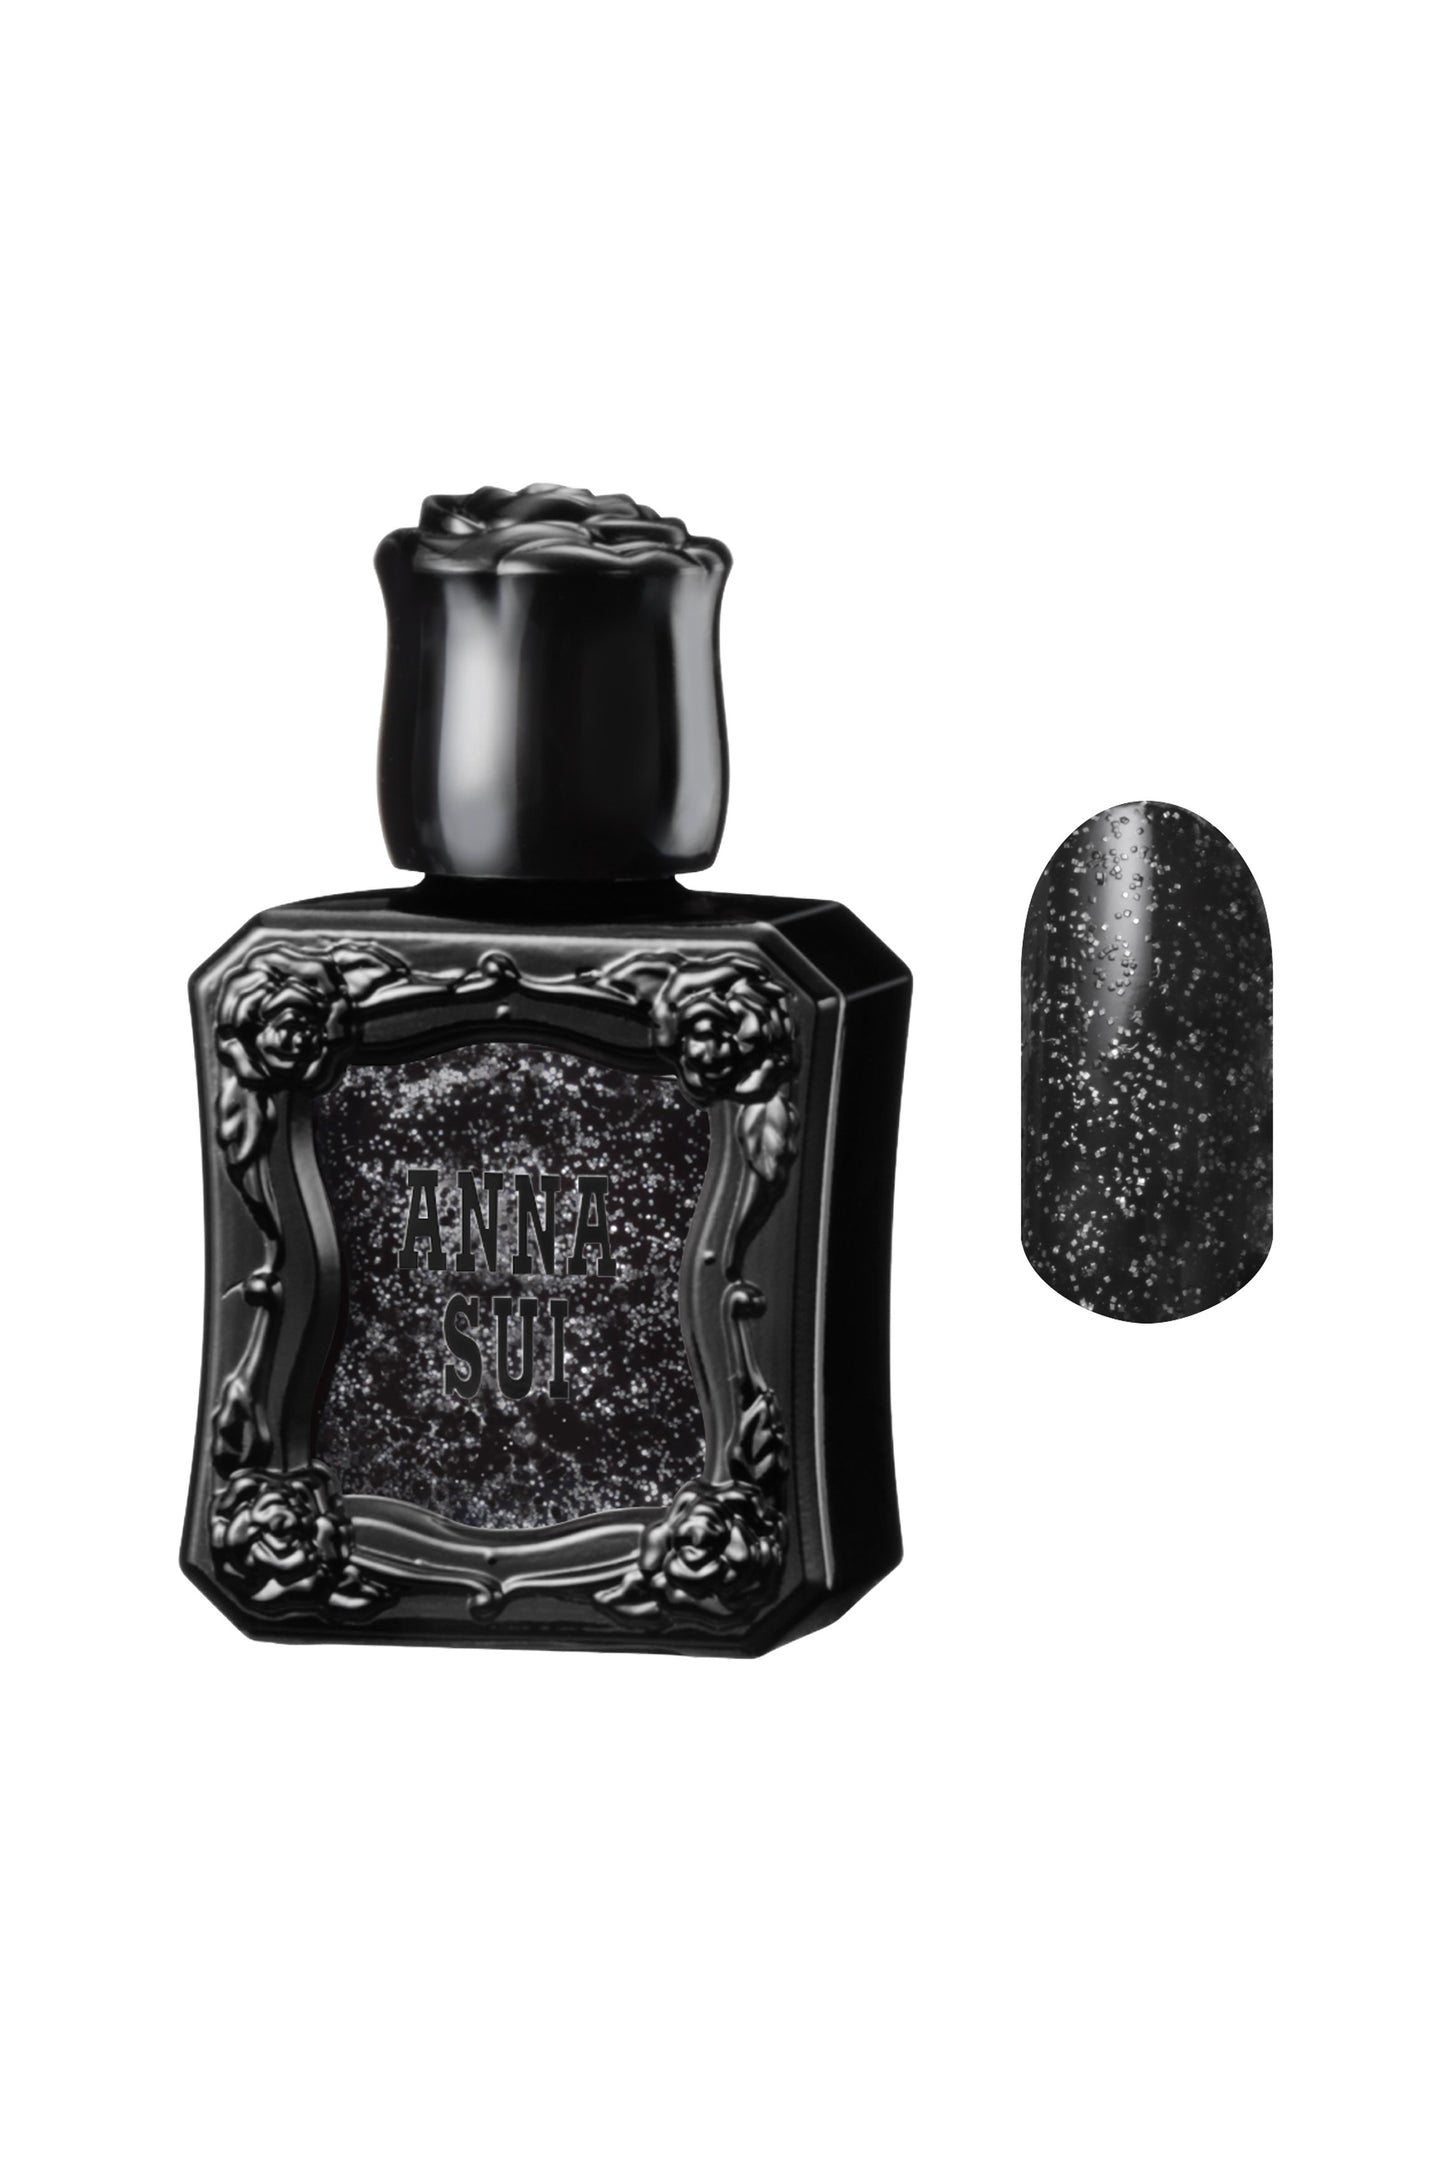 SILVER LAME MONOCHROME Polish bottle rose pattern, black Anna Sui over nail colors in front